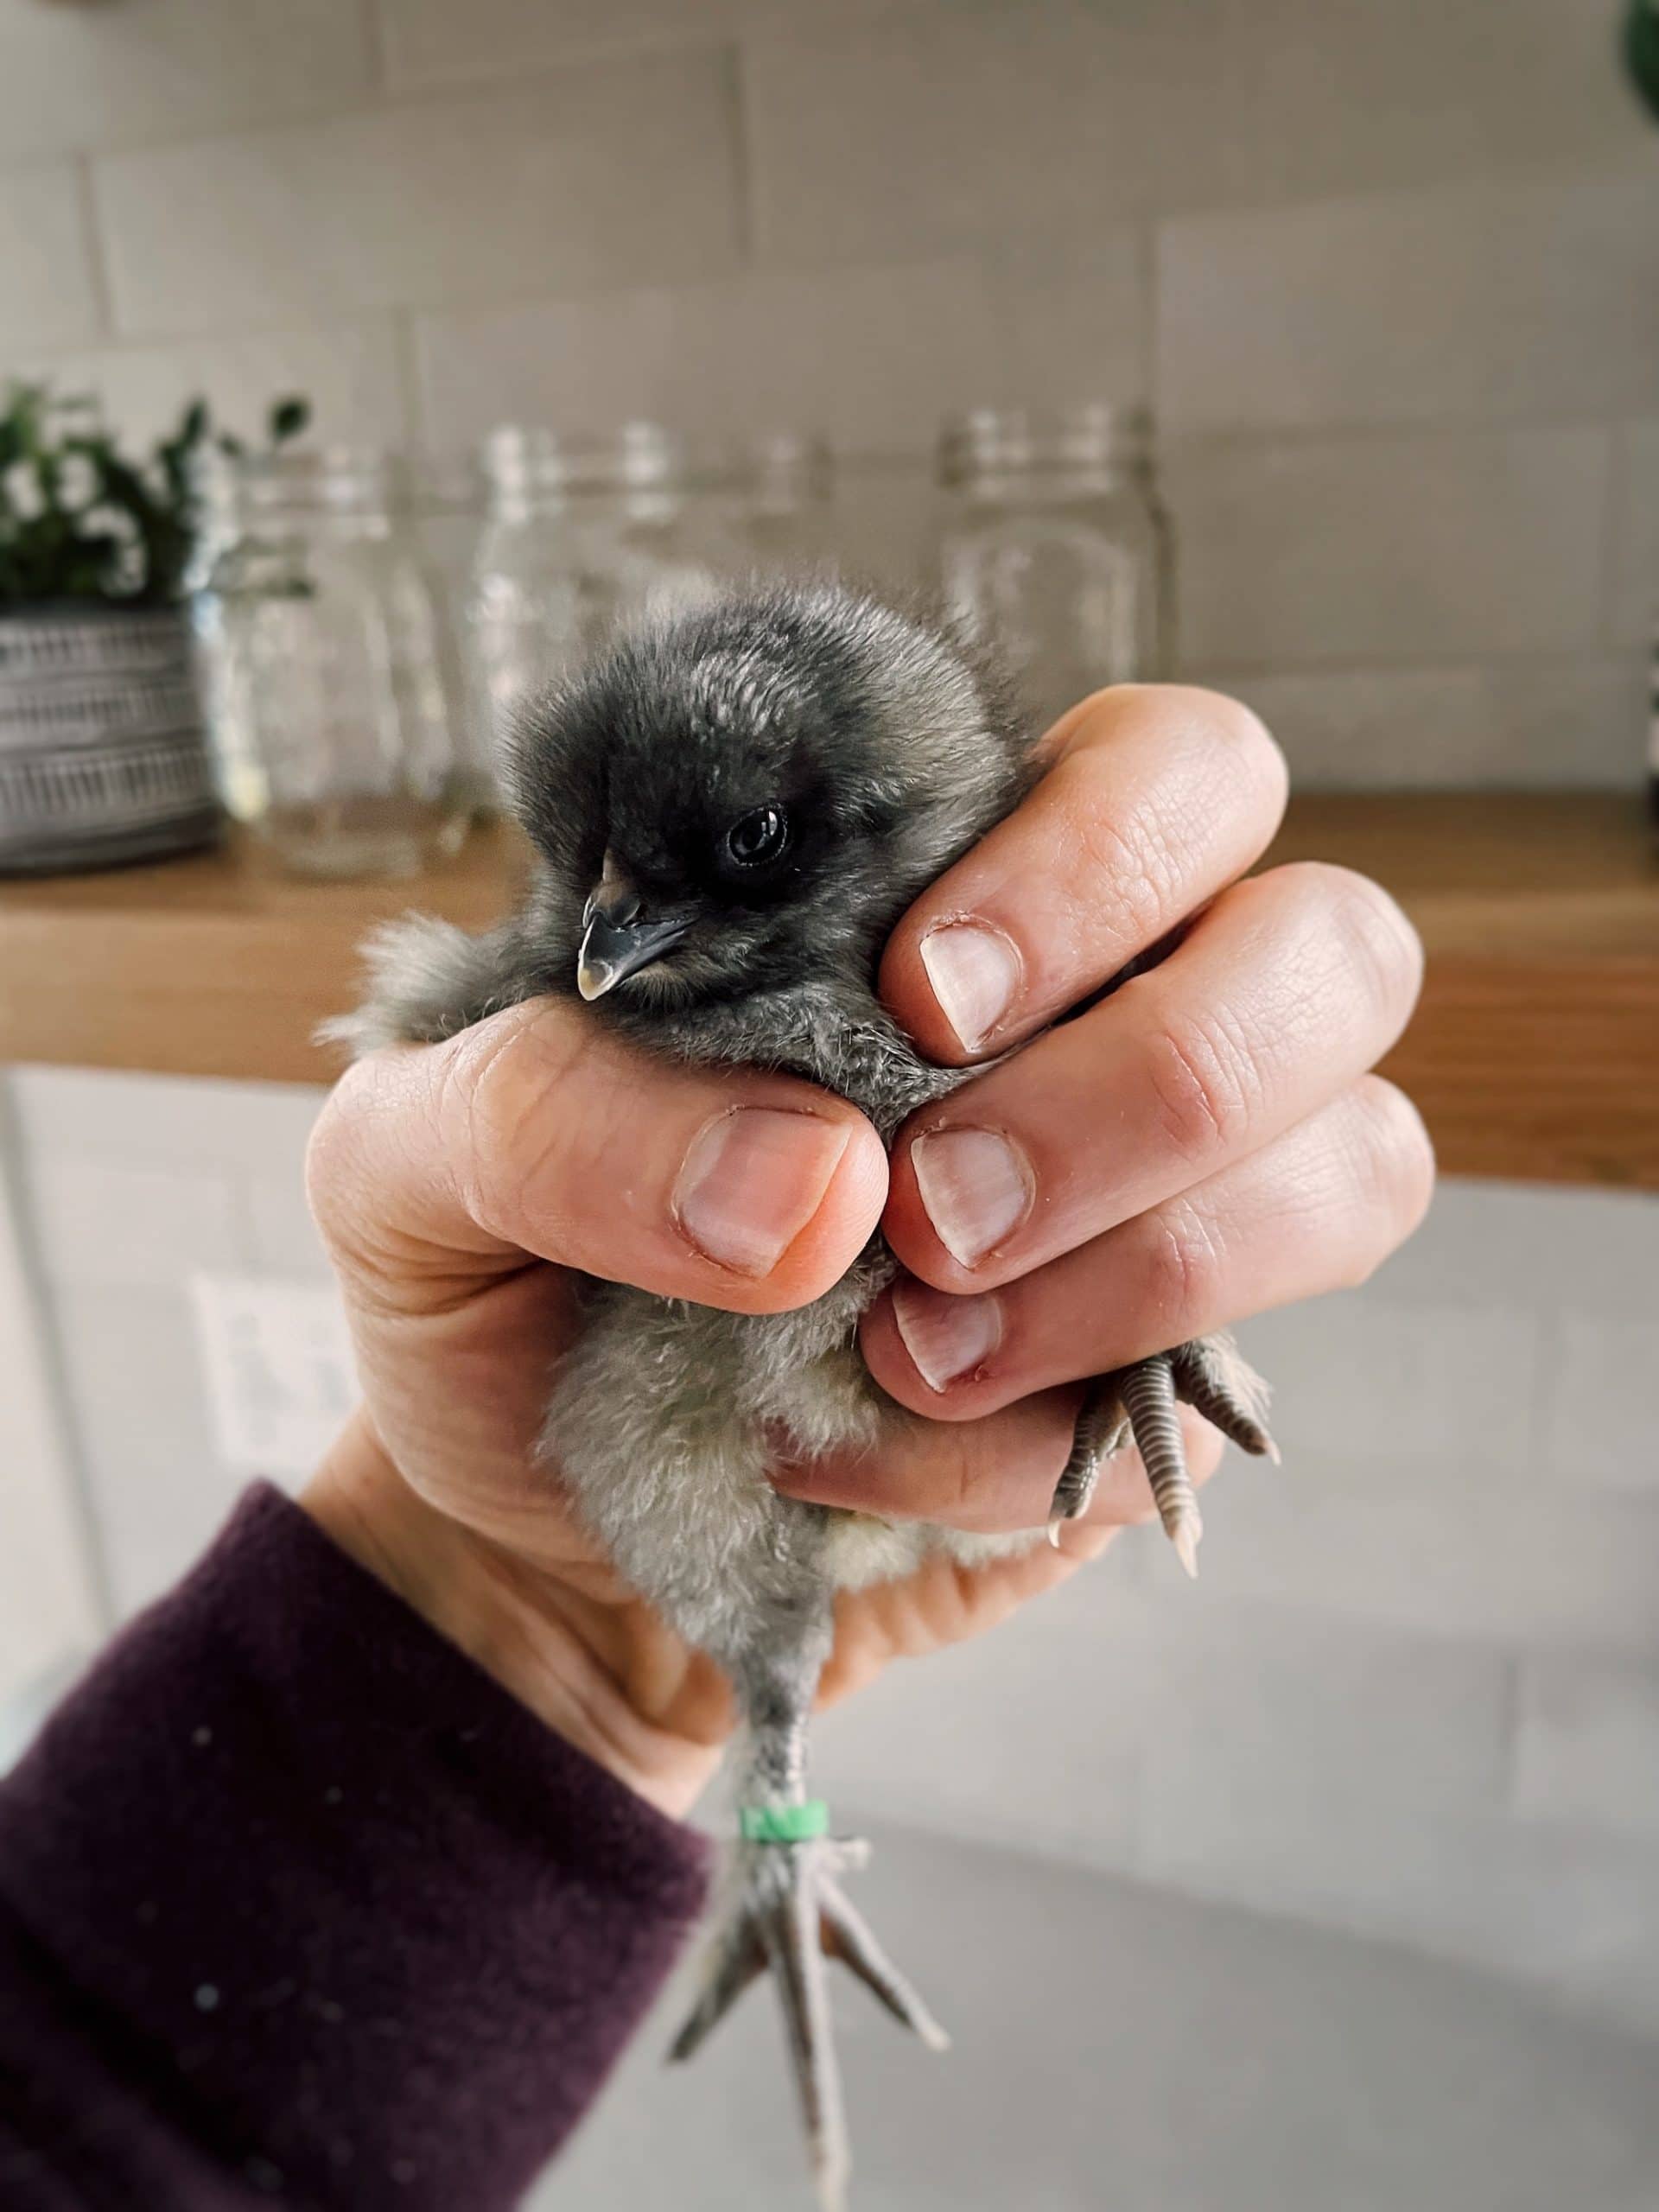 A grey baby chick being held by a hand